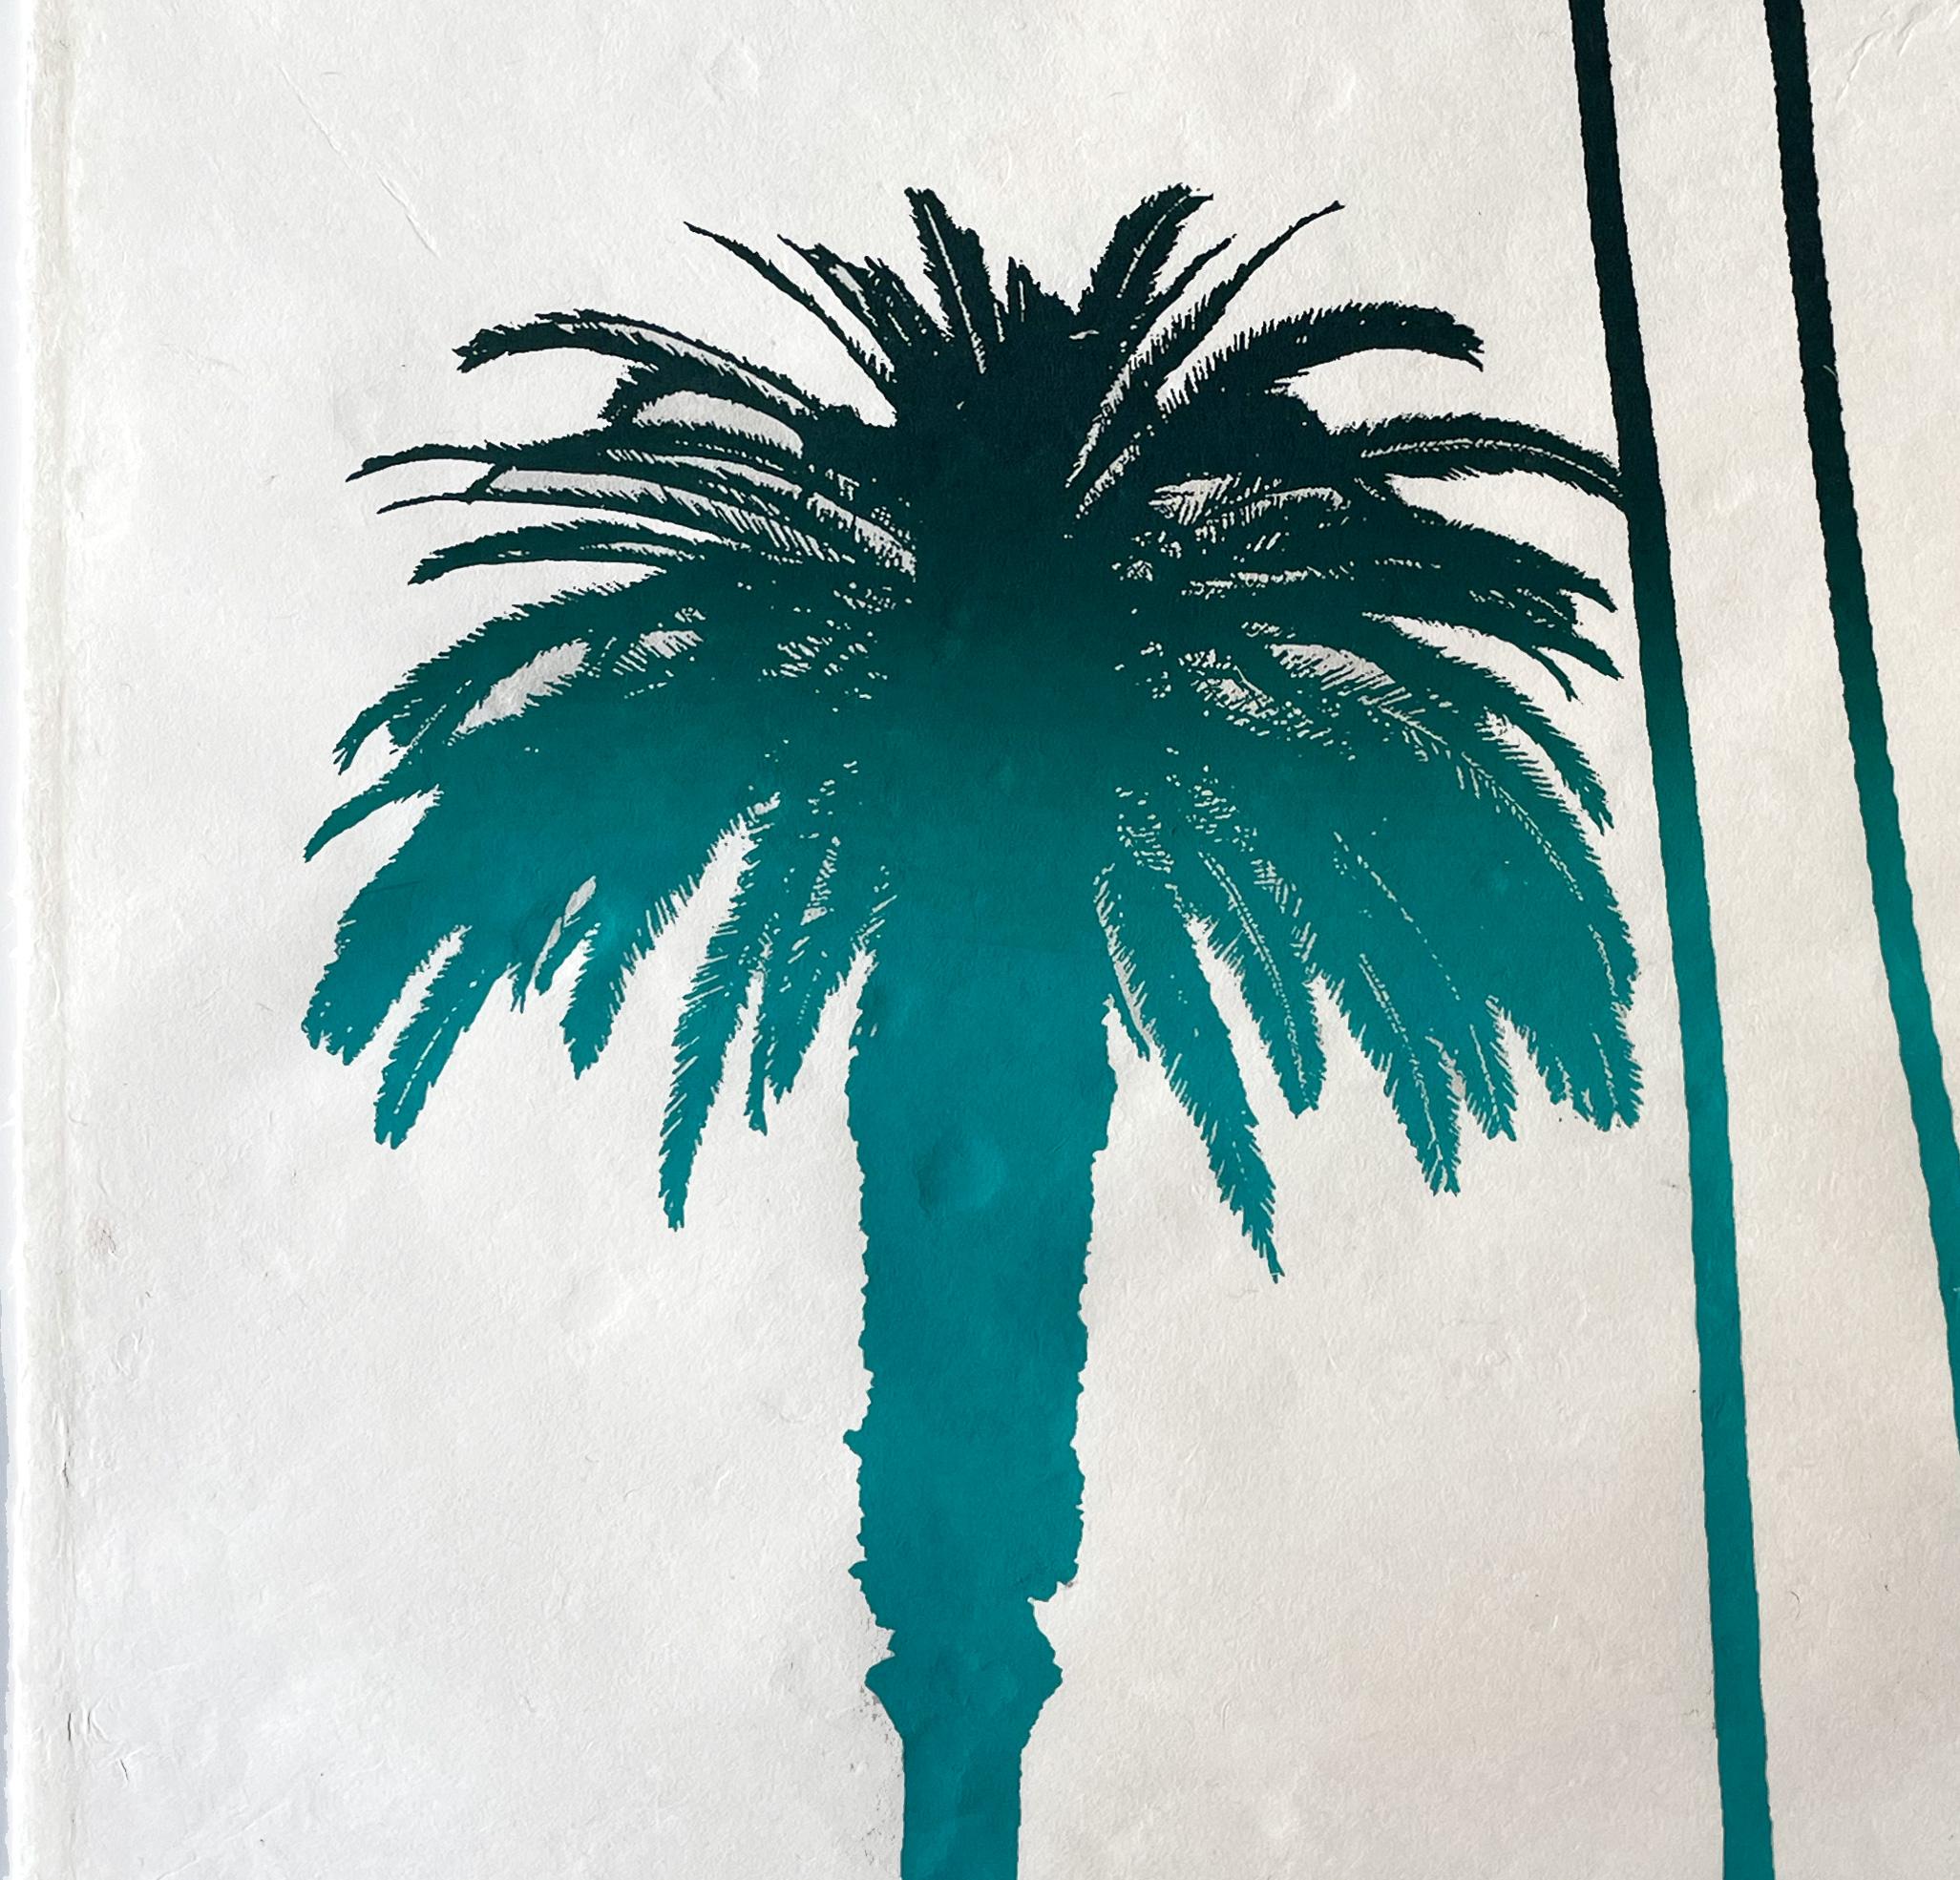 Frank Romero created this iconic serigraph of California palm trees. Signed and numbered by the artist.

Throughout his 40 year career as an artist, Frank Romero has been a dedicated member of the Los Angeles arts community. As a member of the 1970s